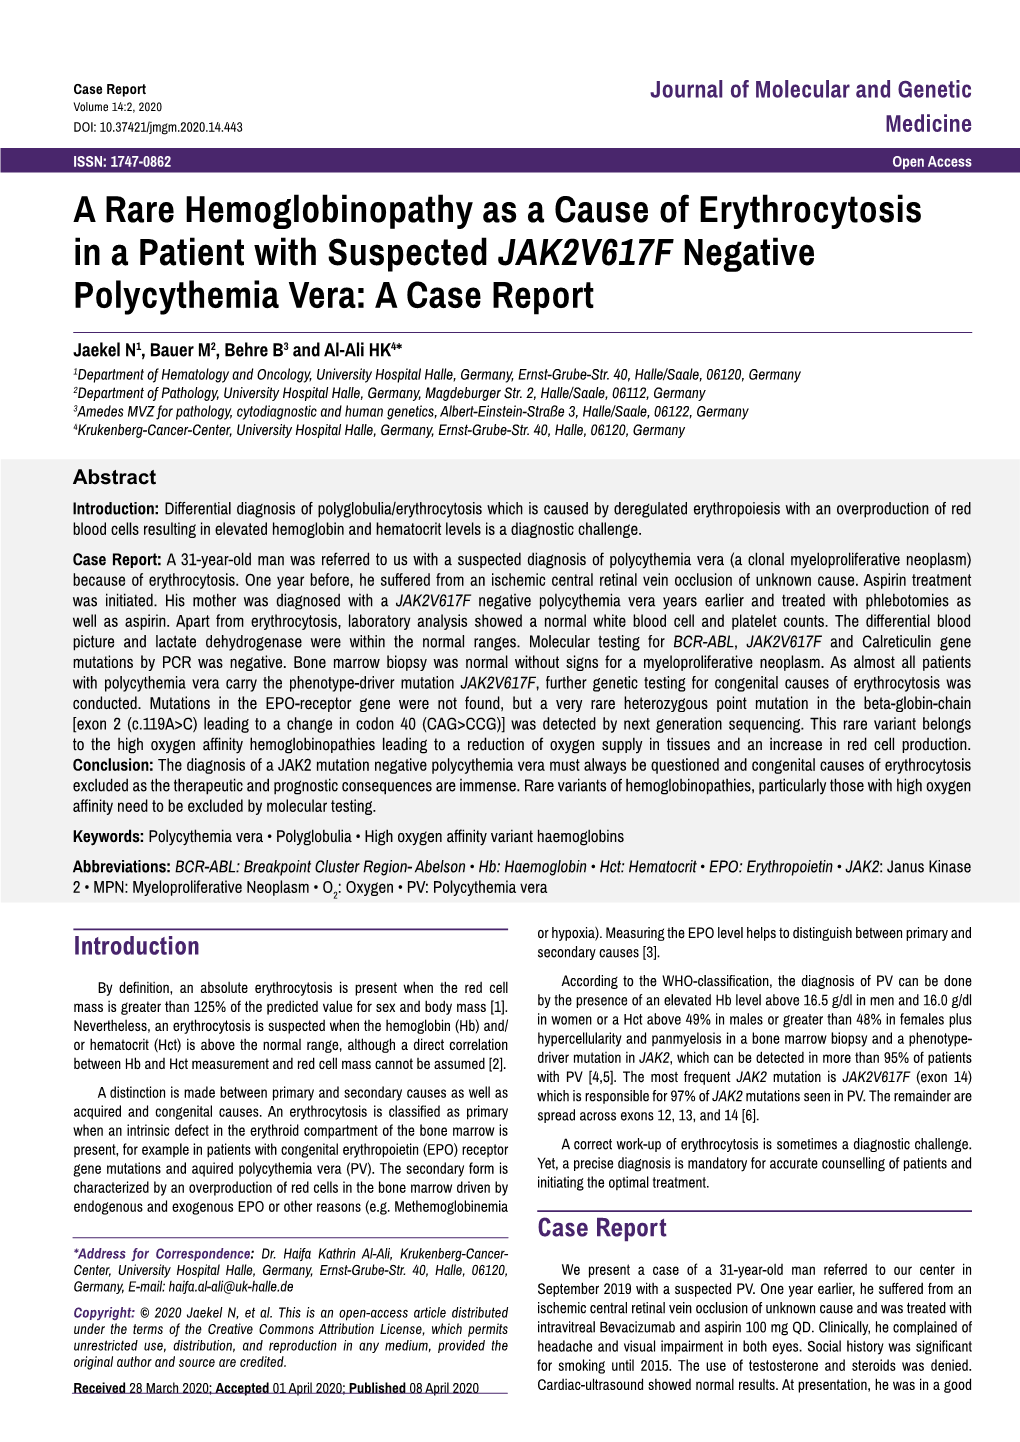 A Rare Hemoglobinopathy As a Cause of Erythrocytosis in a Patient with Suspected JAK2V617F Negative Polycythemia Vera: a Case Report